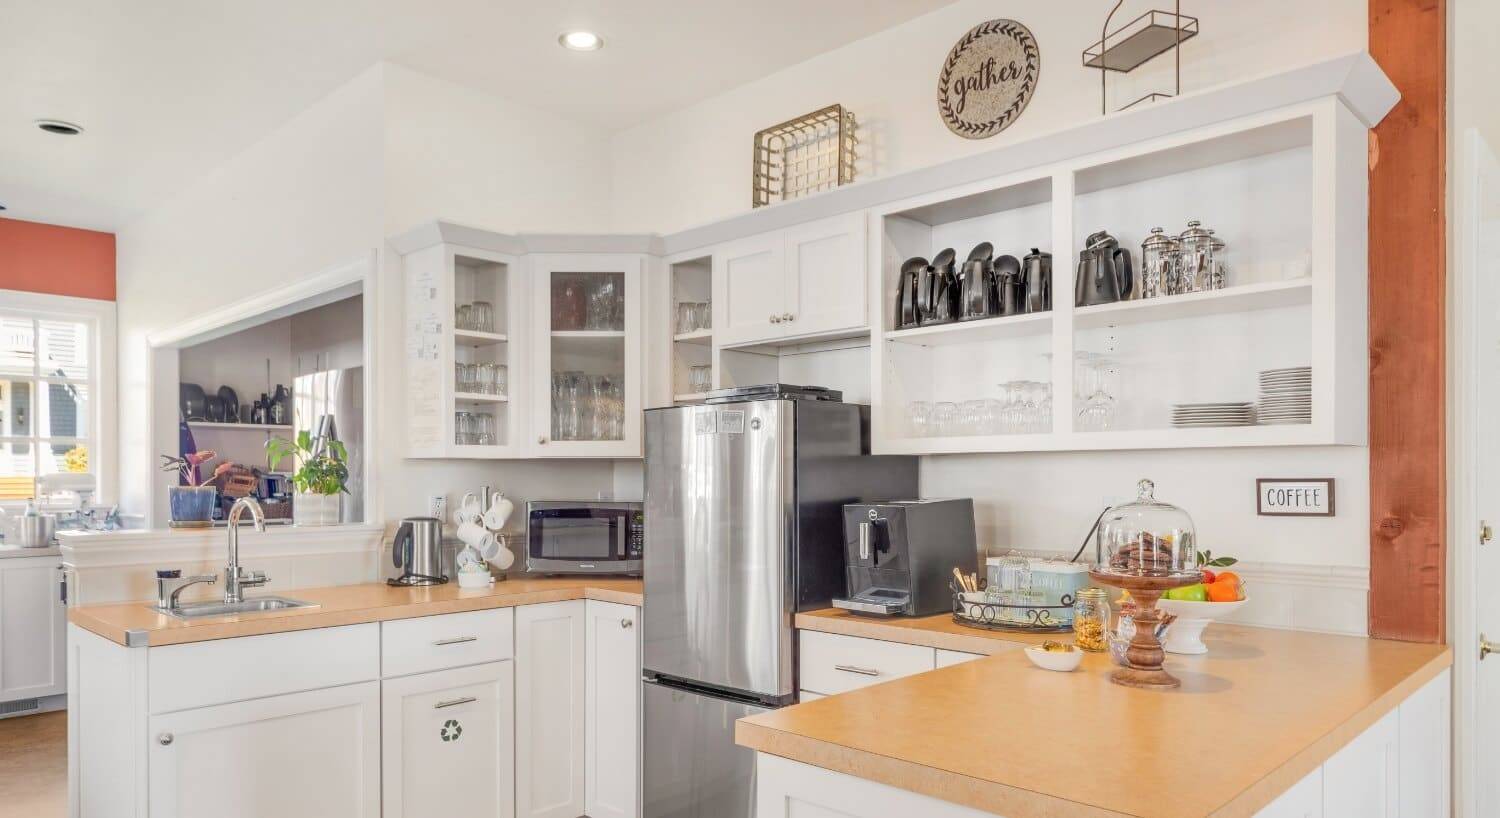 A country kitchen with white cupboards, laminate countertops, a stainless steel appliances, and plates, glassware, tea kettles and coffee pots on the shelves.